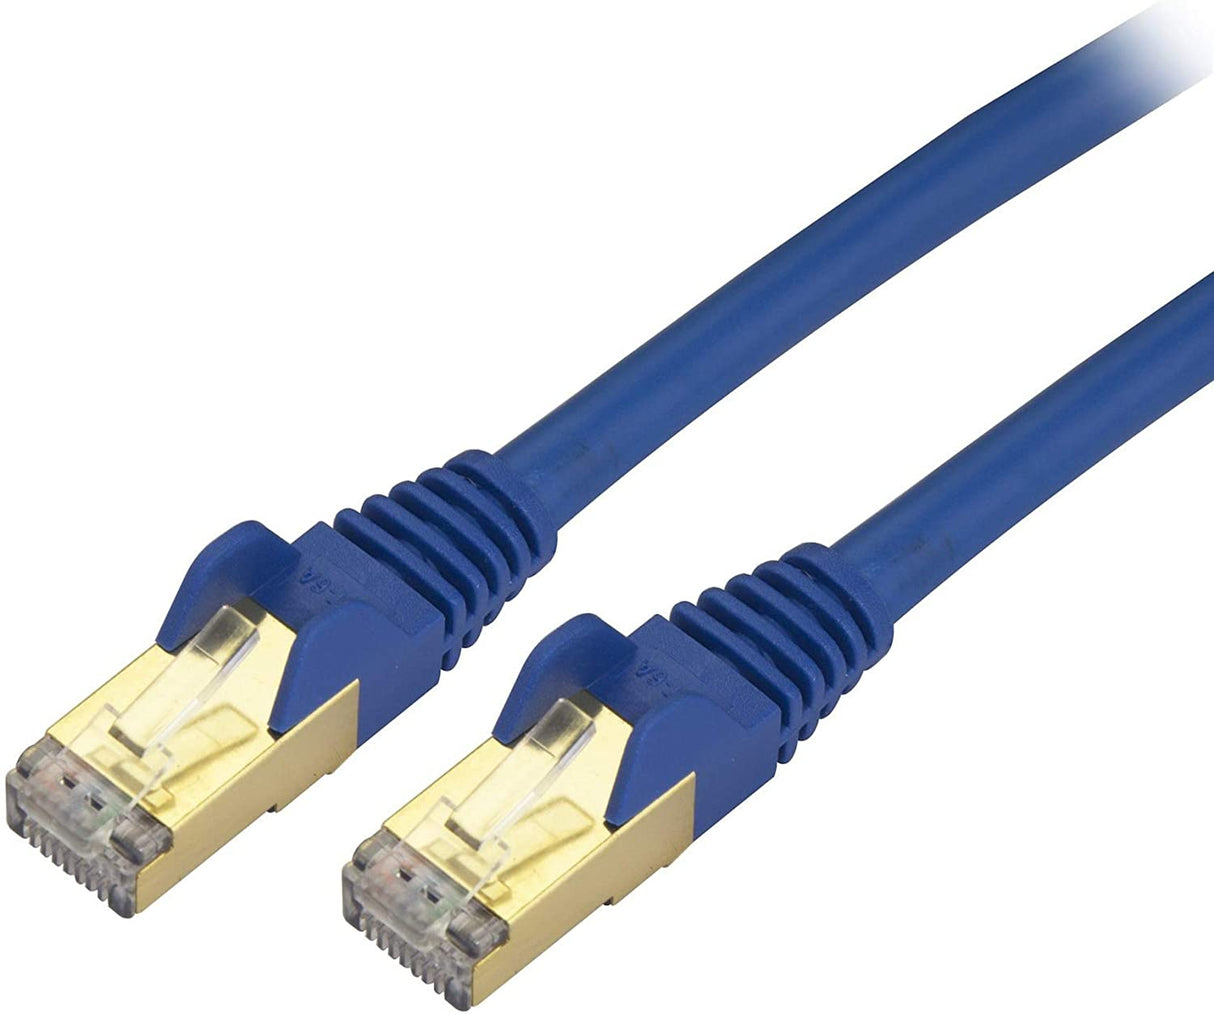 StarTech.com 3ft CAT6a Ethernet Cable - 10 Gigabit Shielded Snagless RJ45 100W PoE Patch Cord - 10GbE STP Network Cable w/Strain Relief - Blue Fluke Tested/Wiring is UL Certified/TIA (C6ASPAT3BL) 3 ft Blue